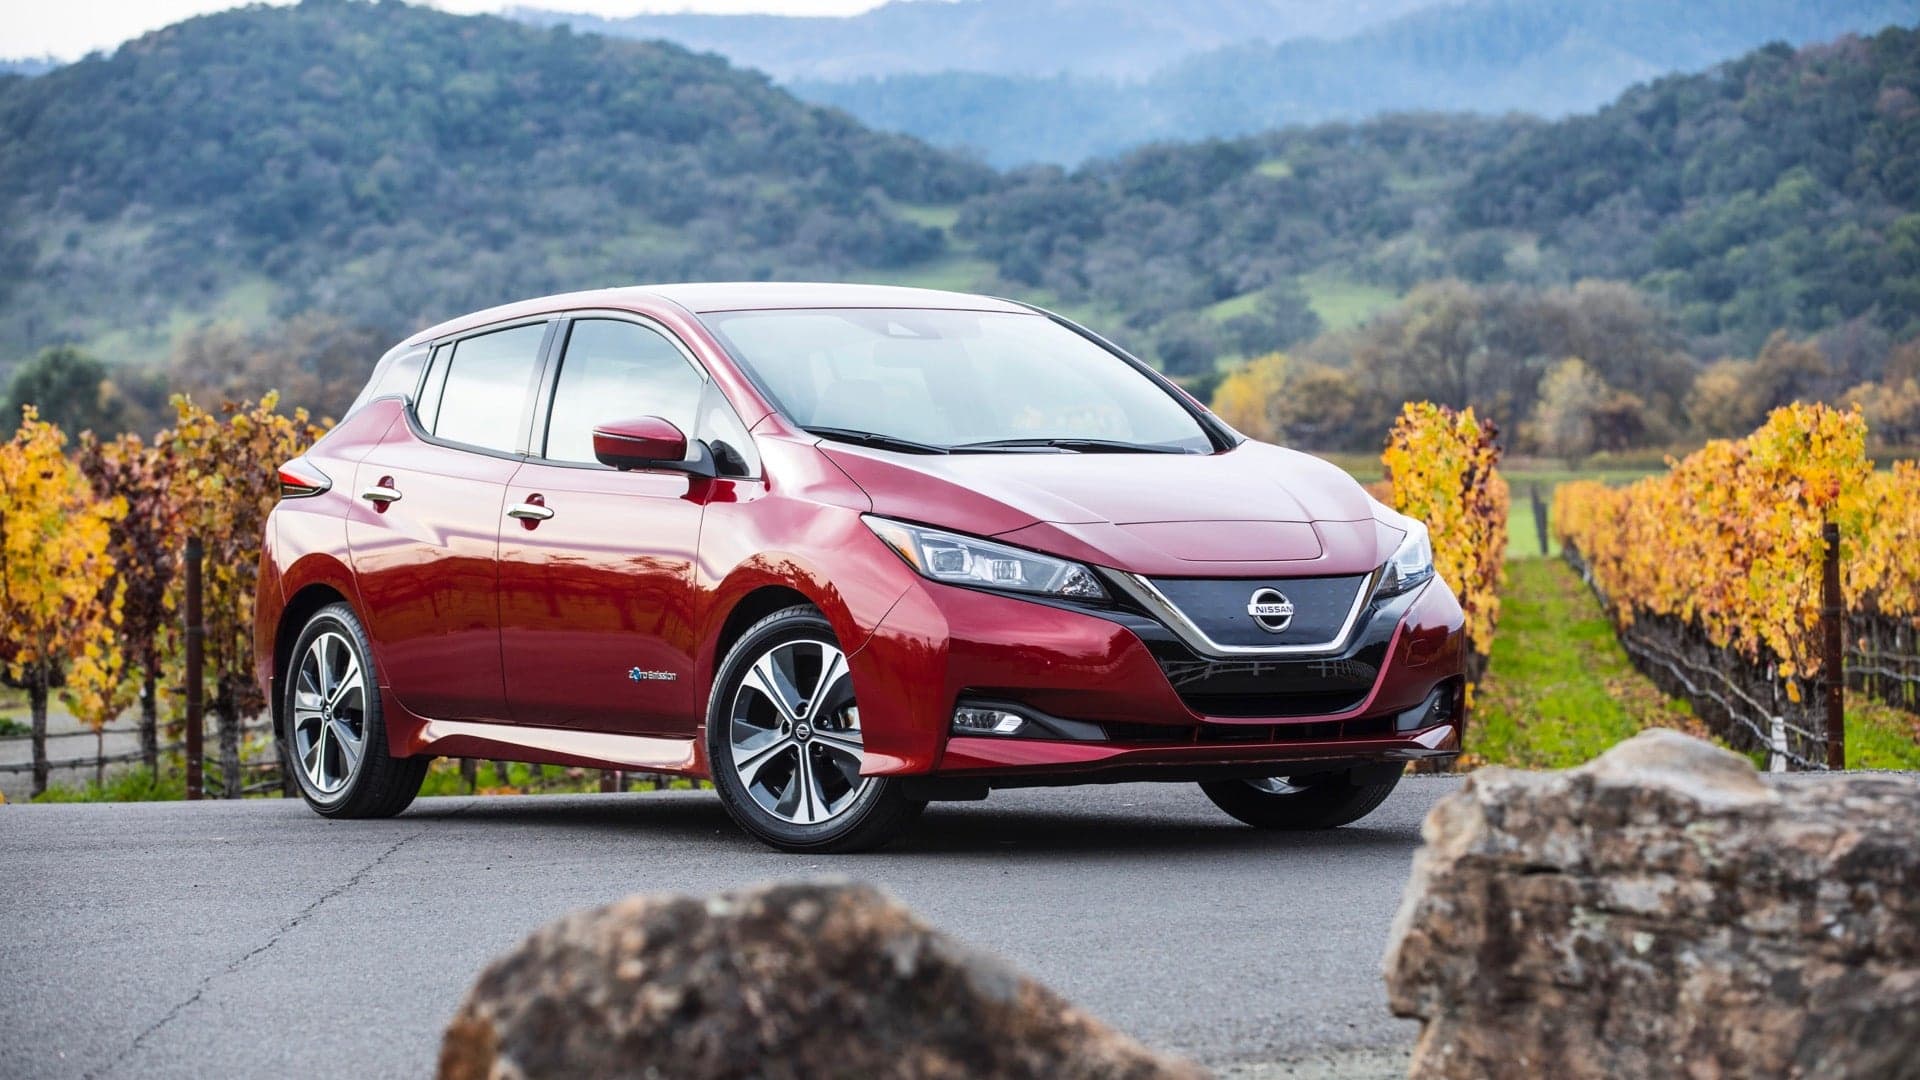 Leaf EV Is Helping Power Nissan’s North American Headquarters Thanks to V2G Tech